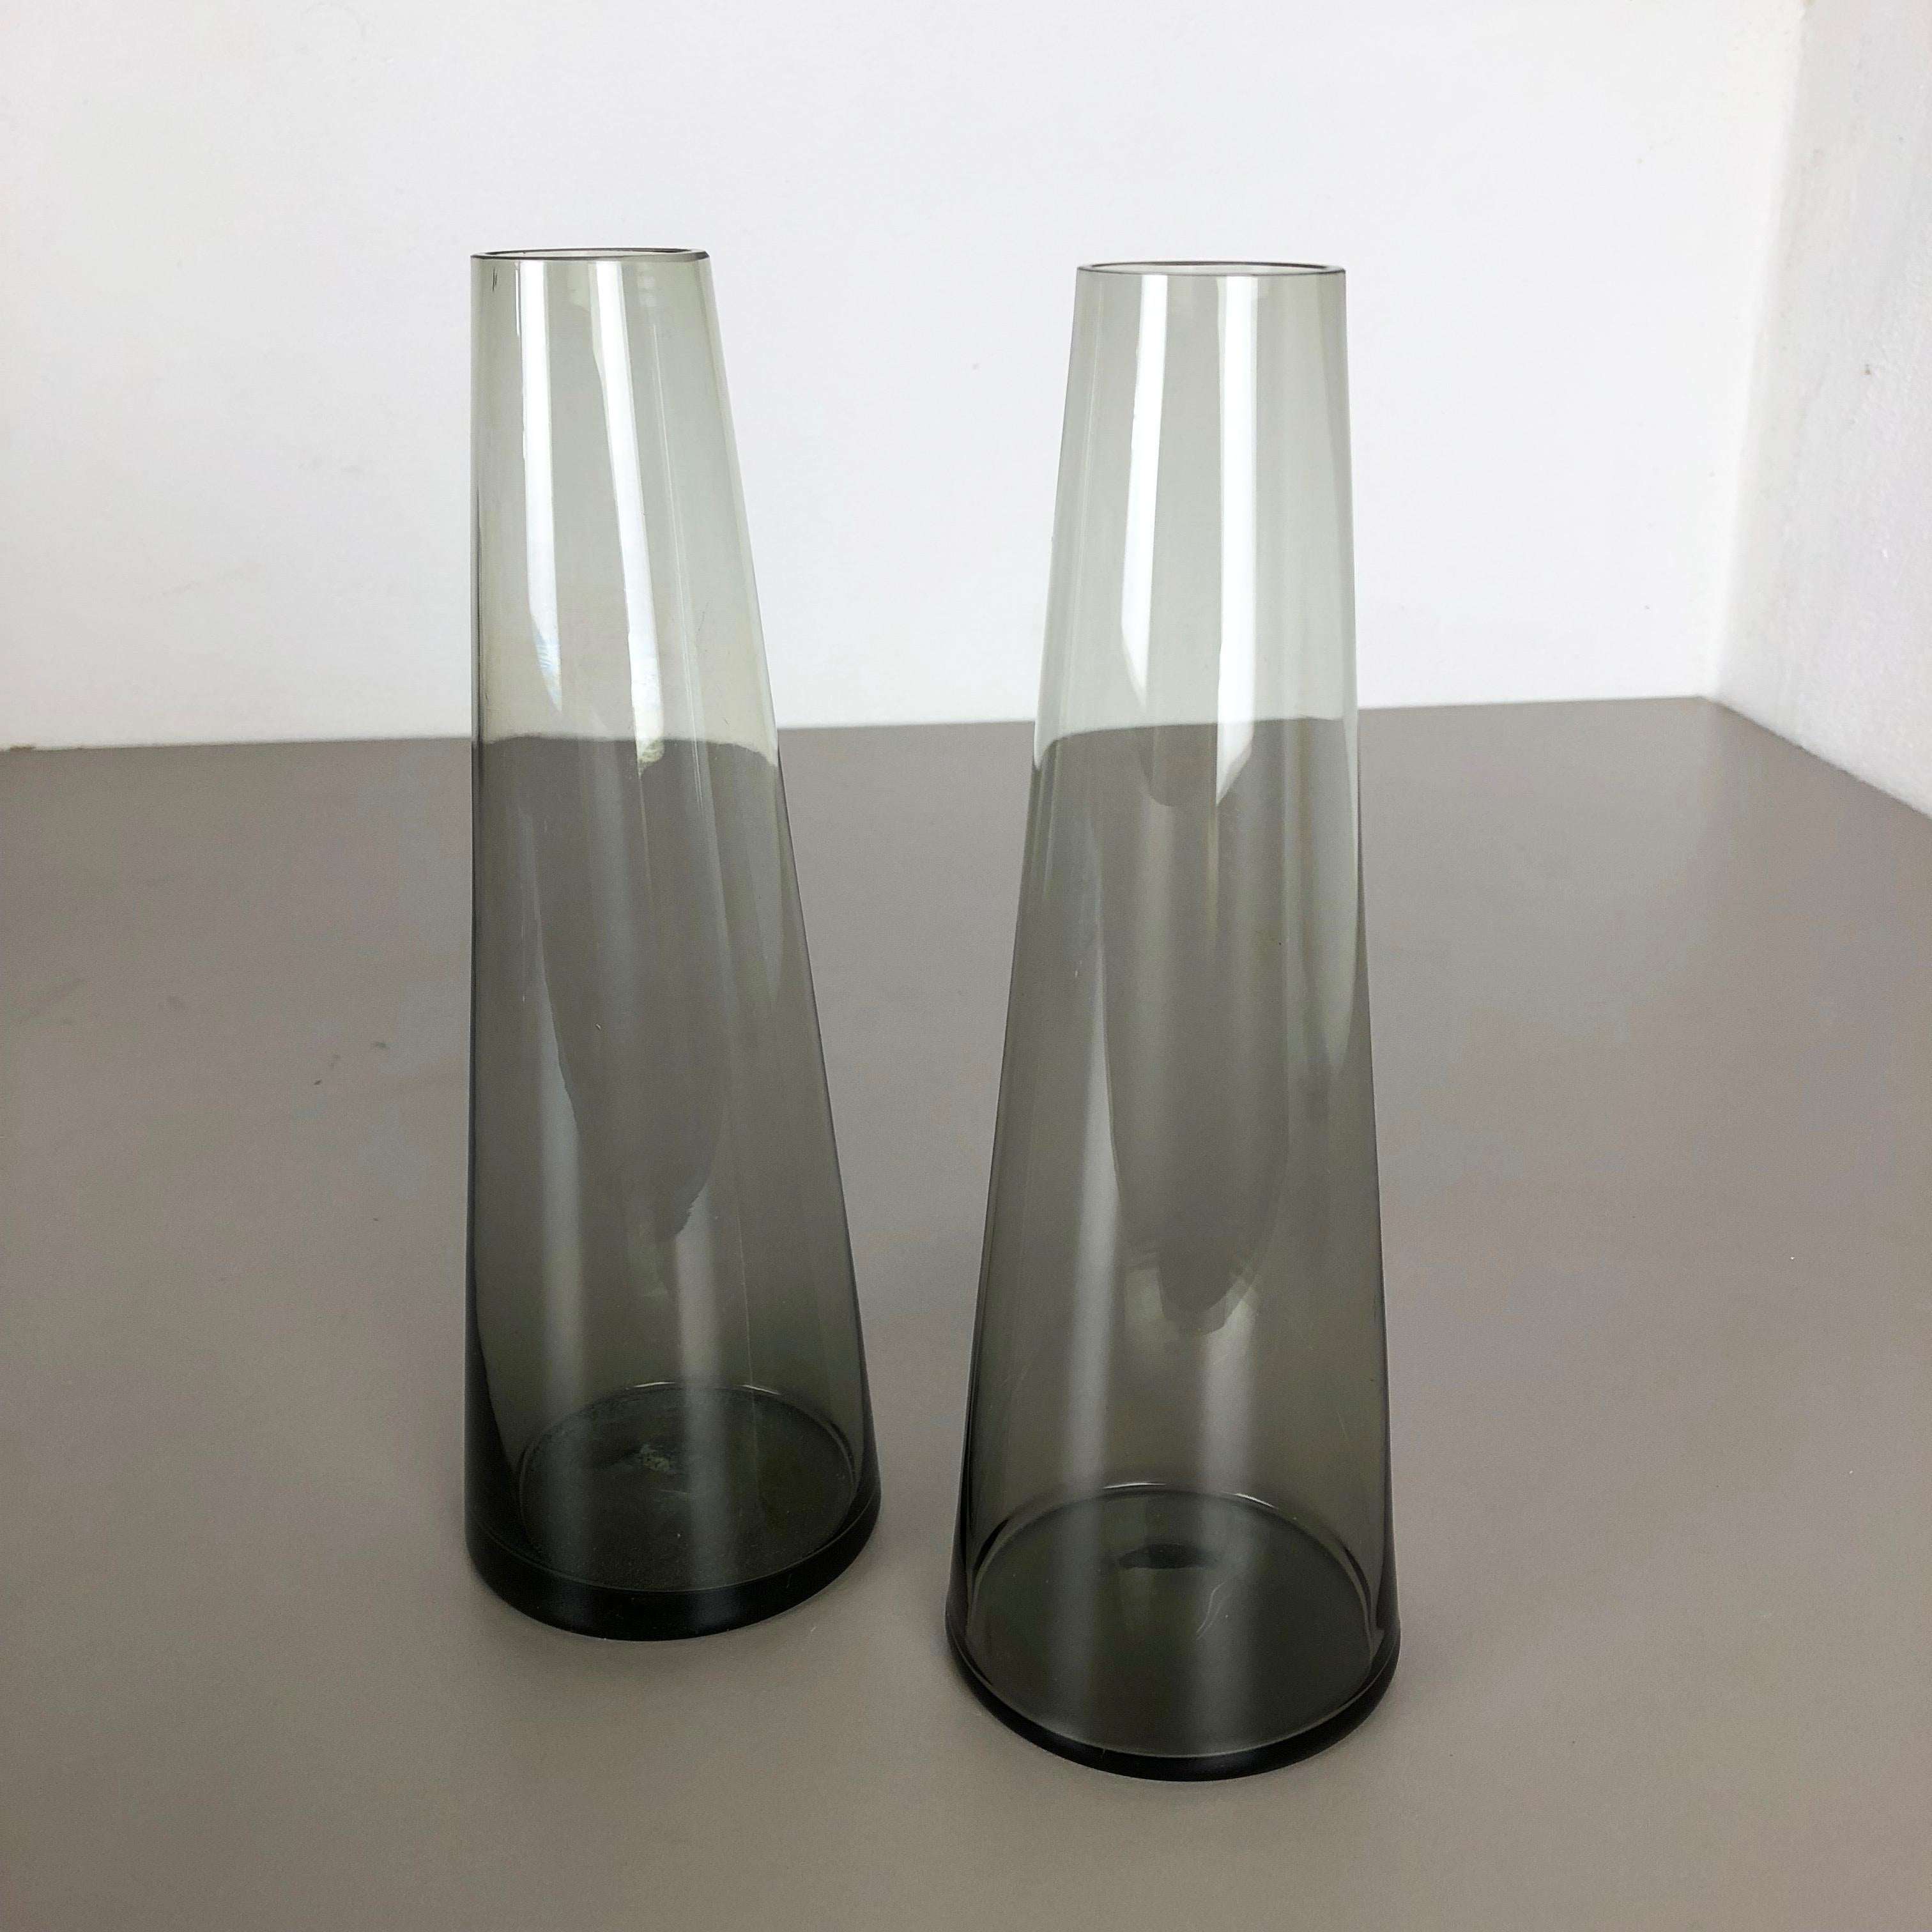 Vintage 1960s Set of 2 Turmalin Vases by Wilhelm Wagenfeld for WMF, Germany For Sale 4